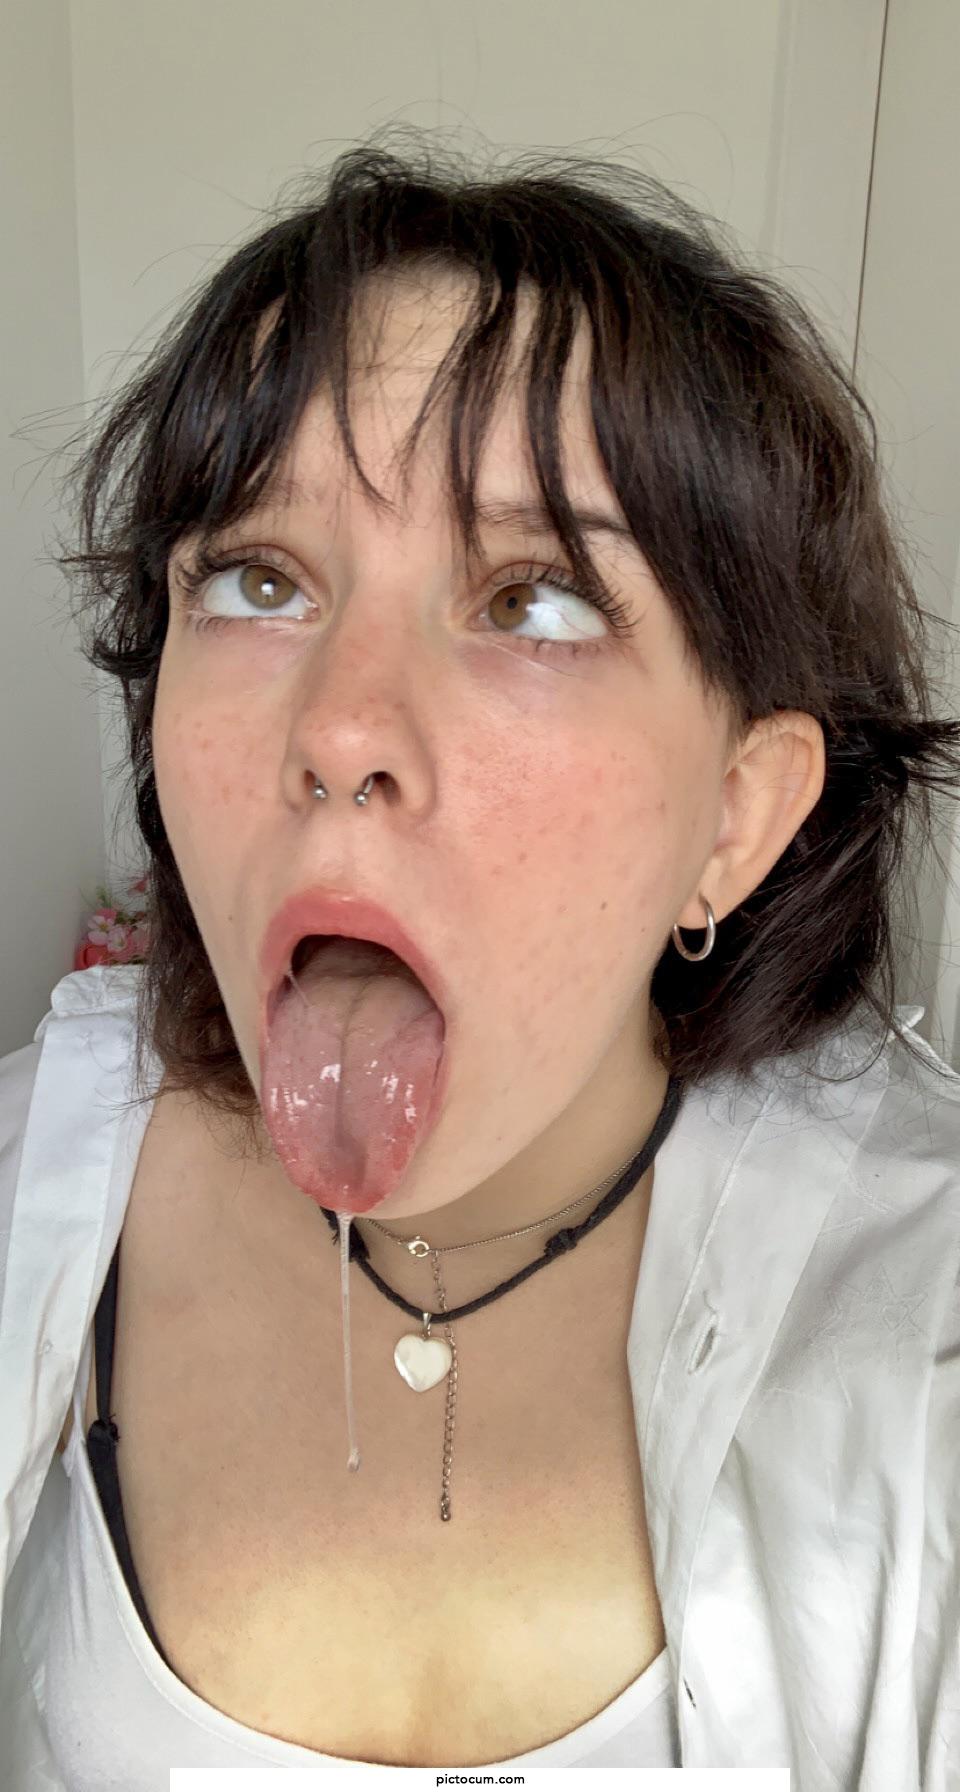 My tongue feels real good i promise